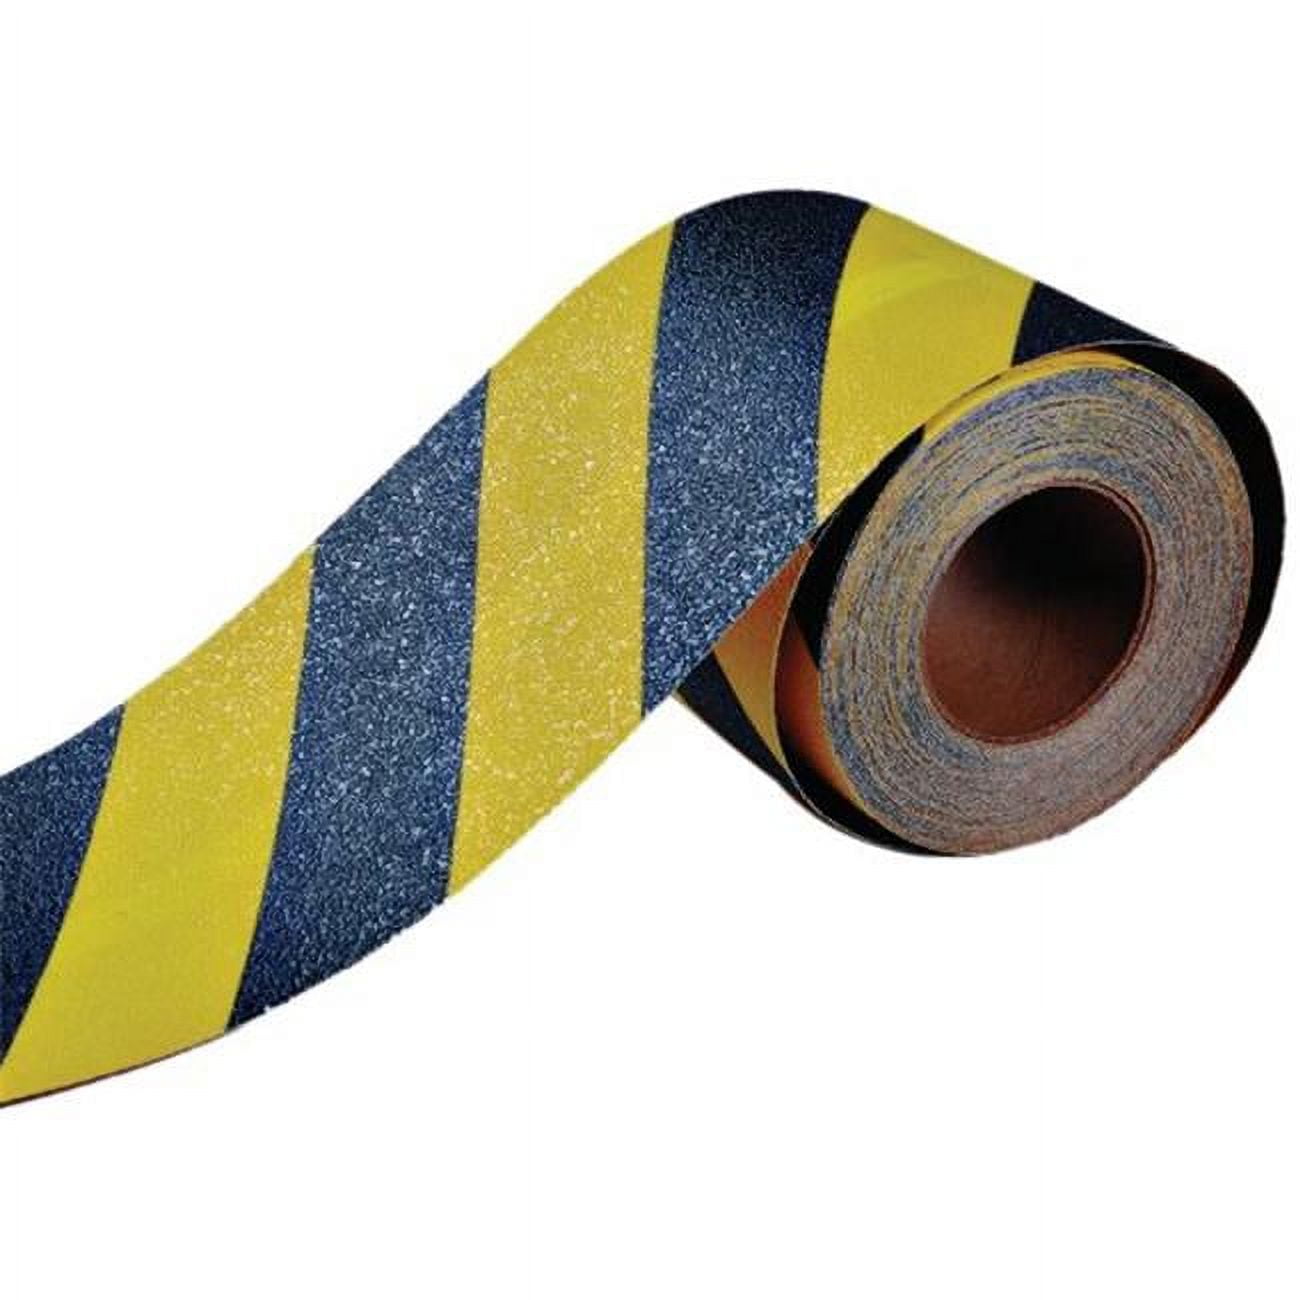 Durable 825r6bky Anti-slip Tape, 6 X 60 In. - Black & Yellow